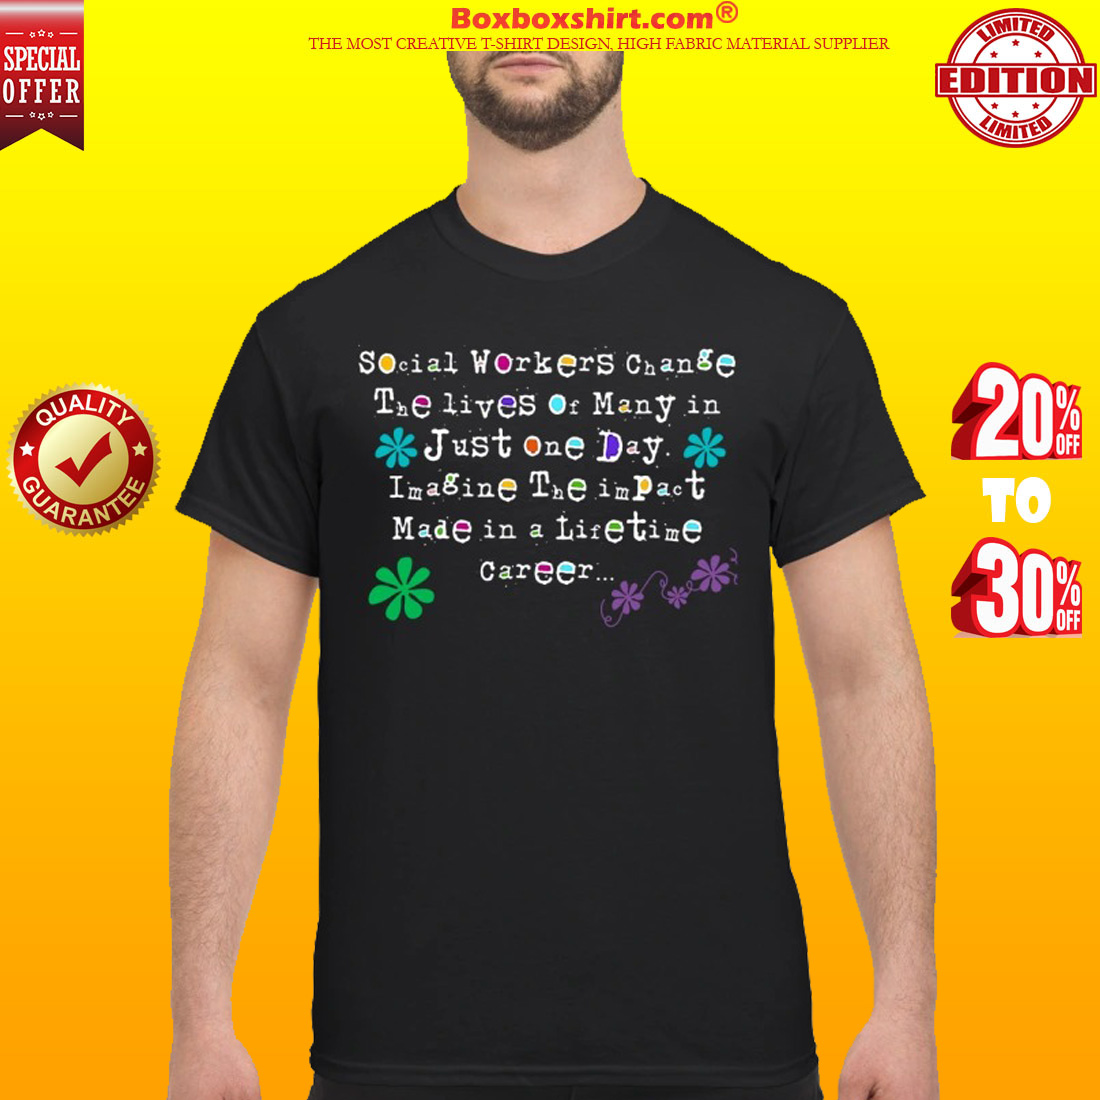 Social workers change the lives lof many in just one day shirt